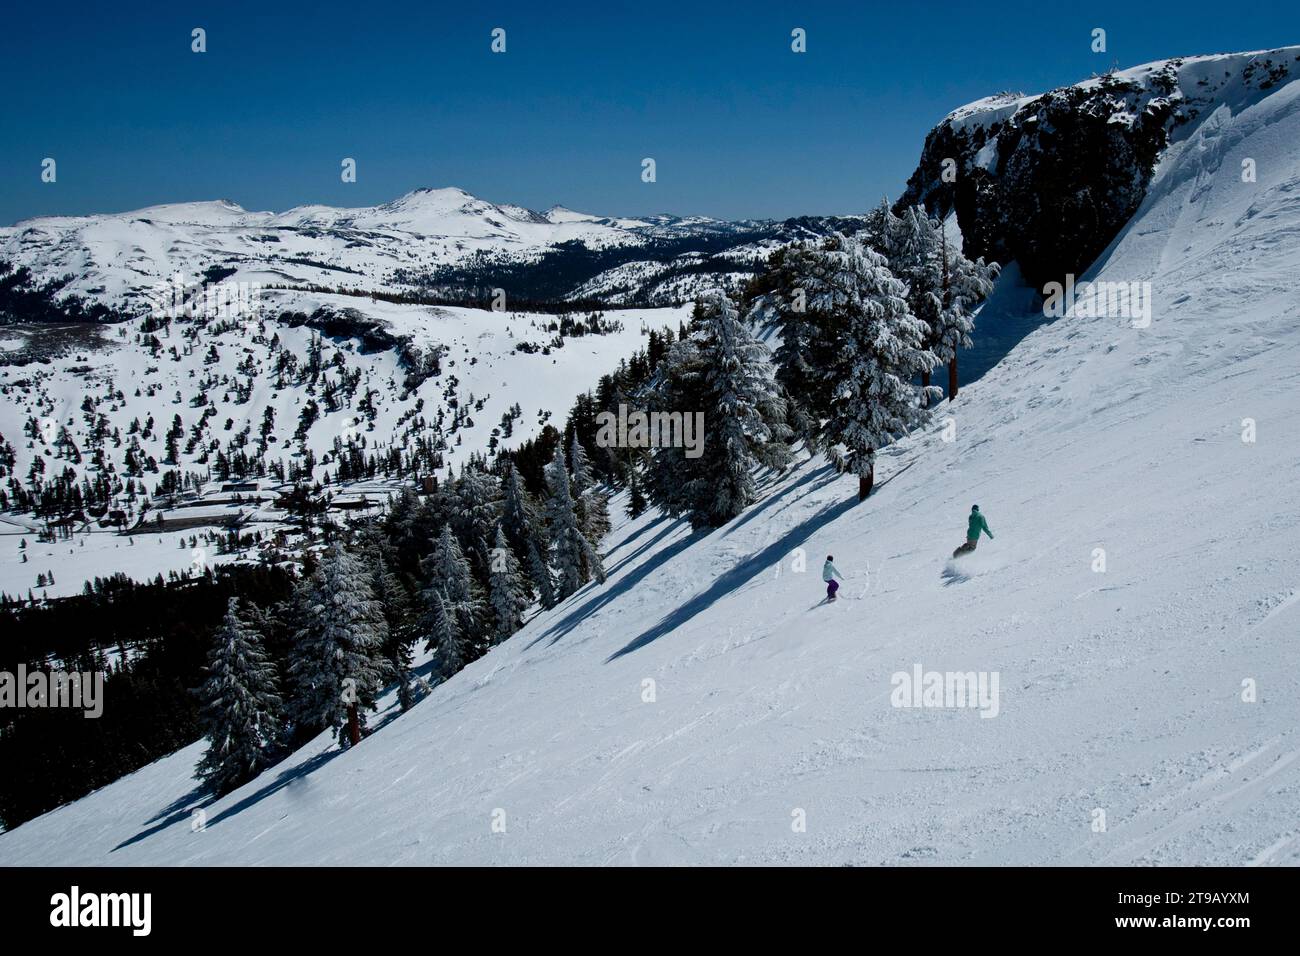 Two snowboarders riding spring conditions with a nice view. Stock Photo